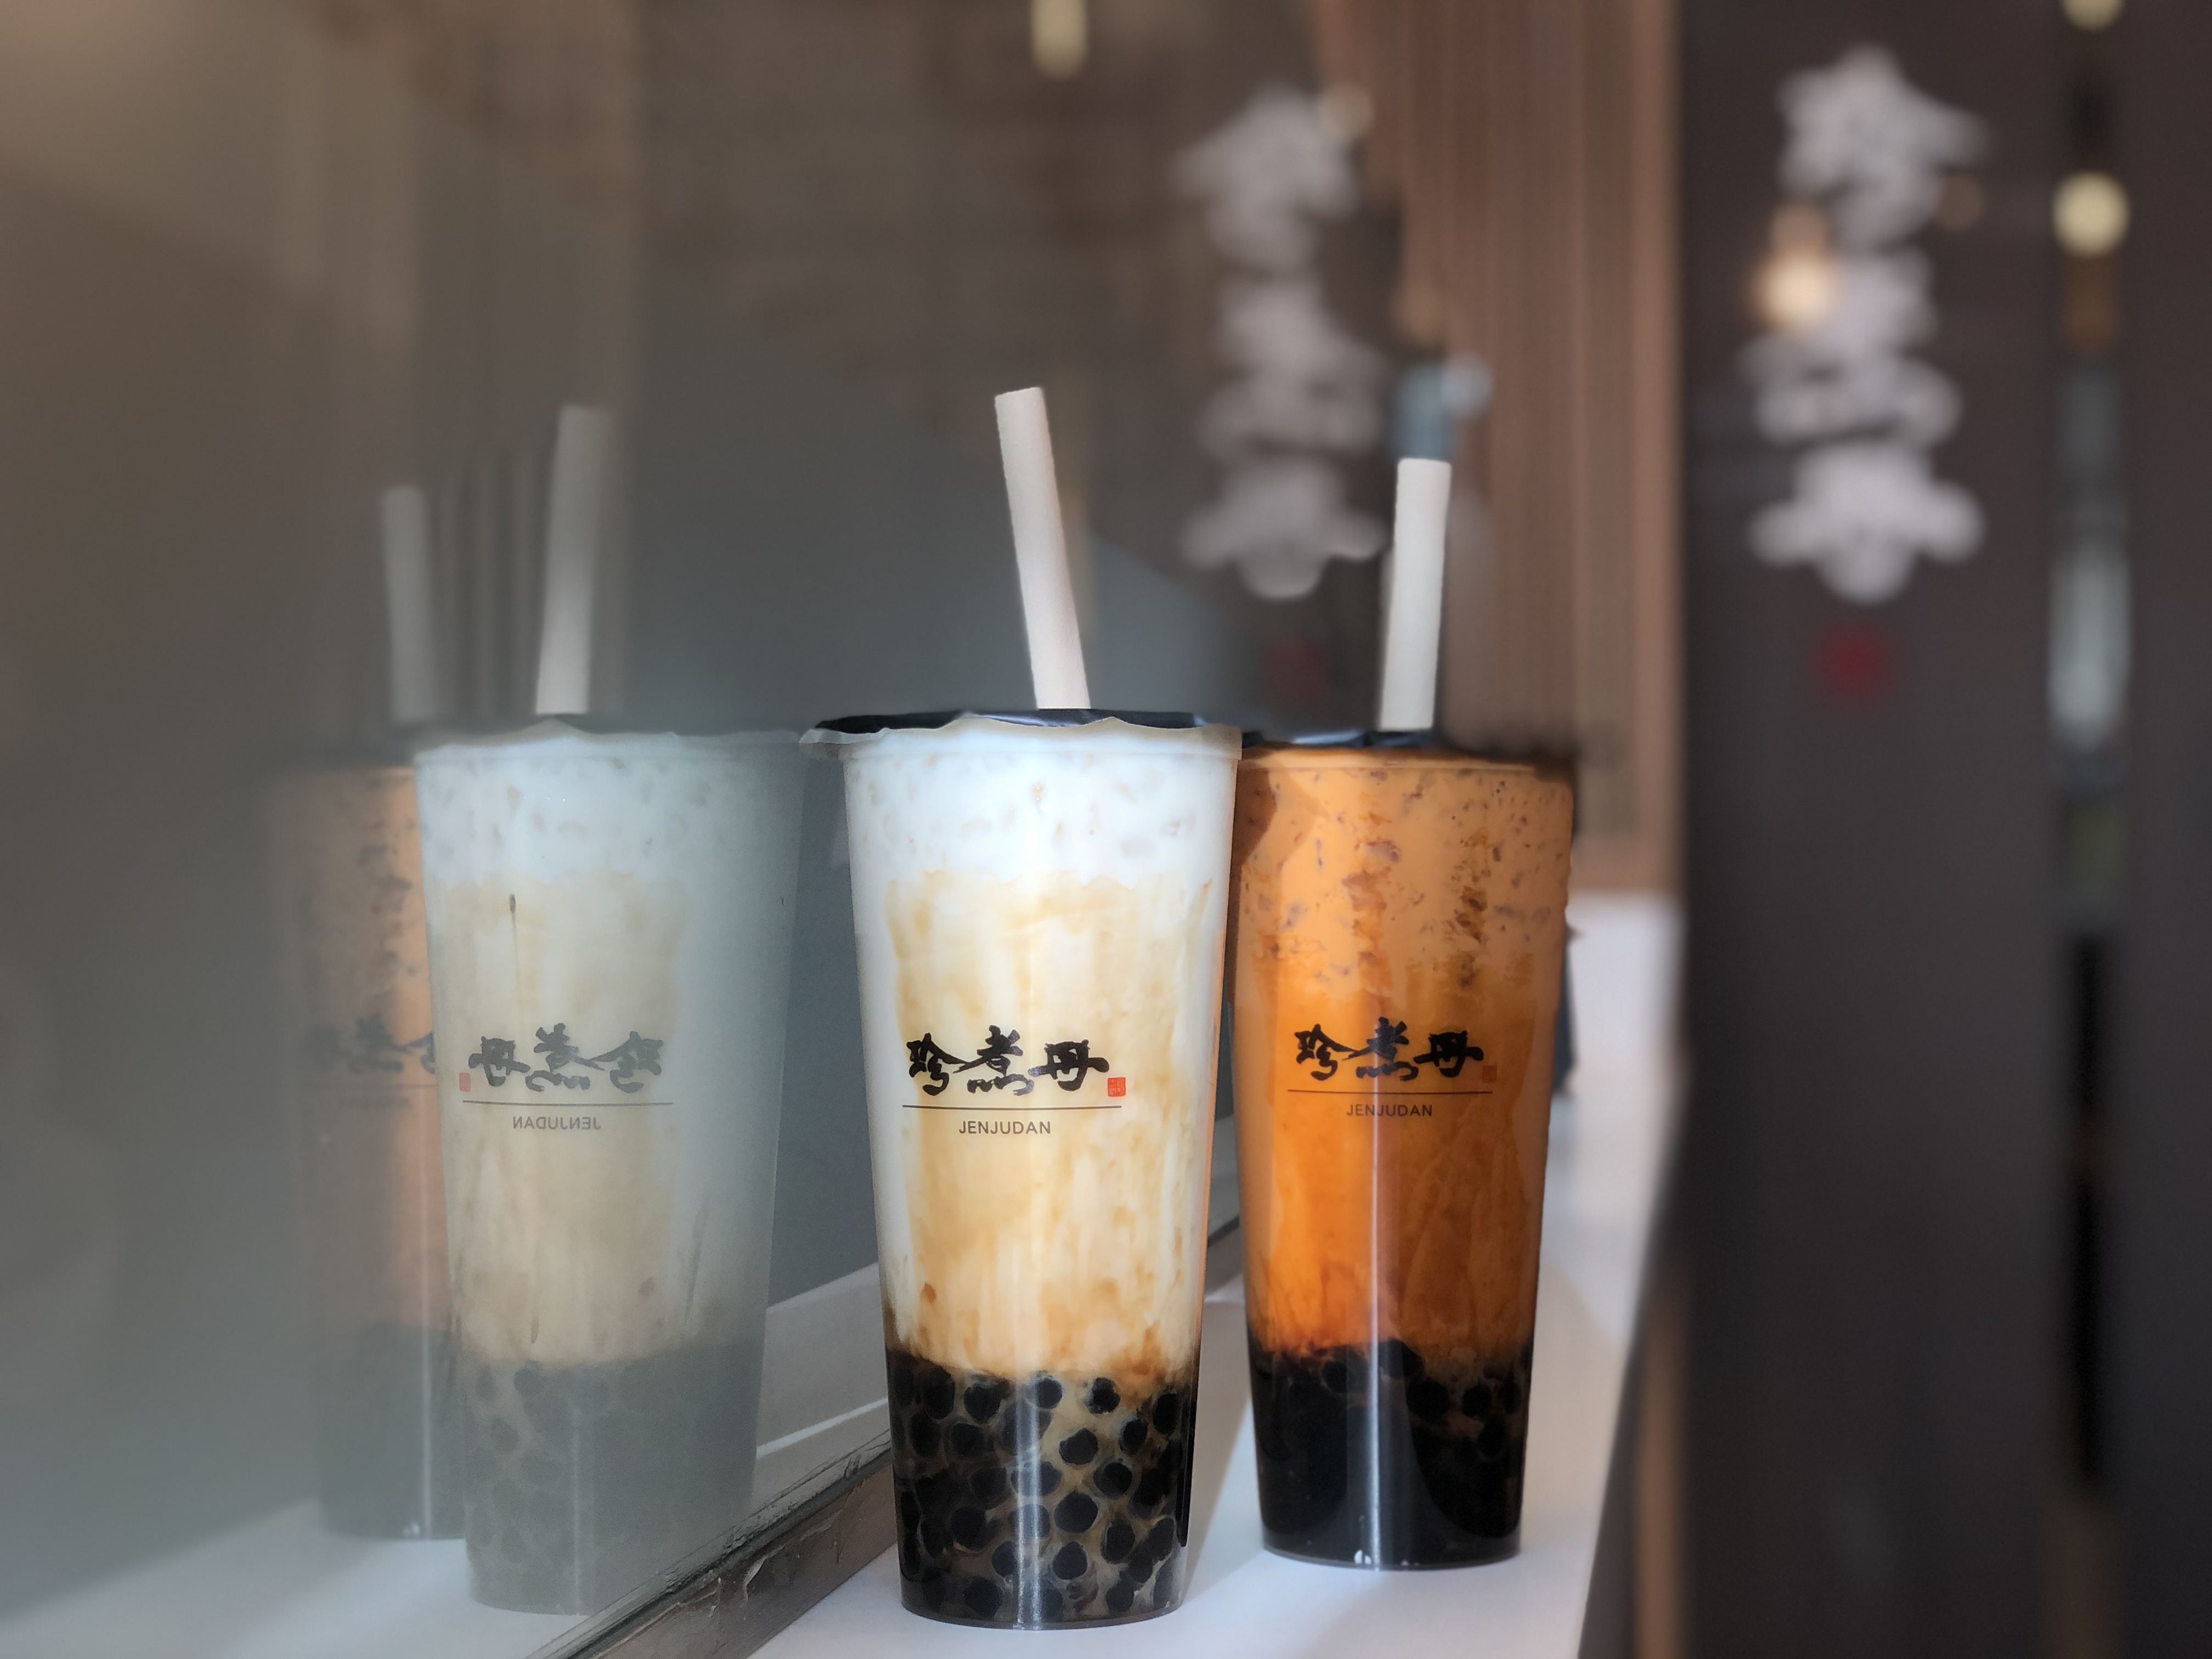 Truedan Bubble Tea coming to Vancouver - Opening 5 stores in BC!